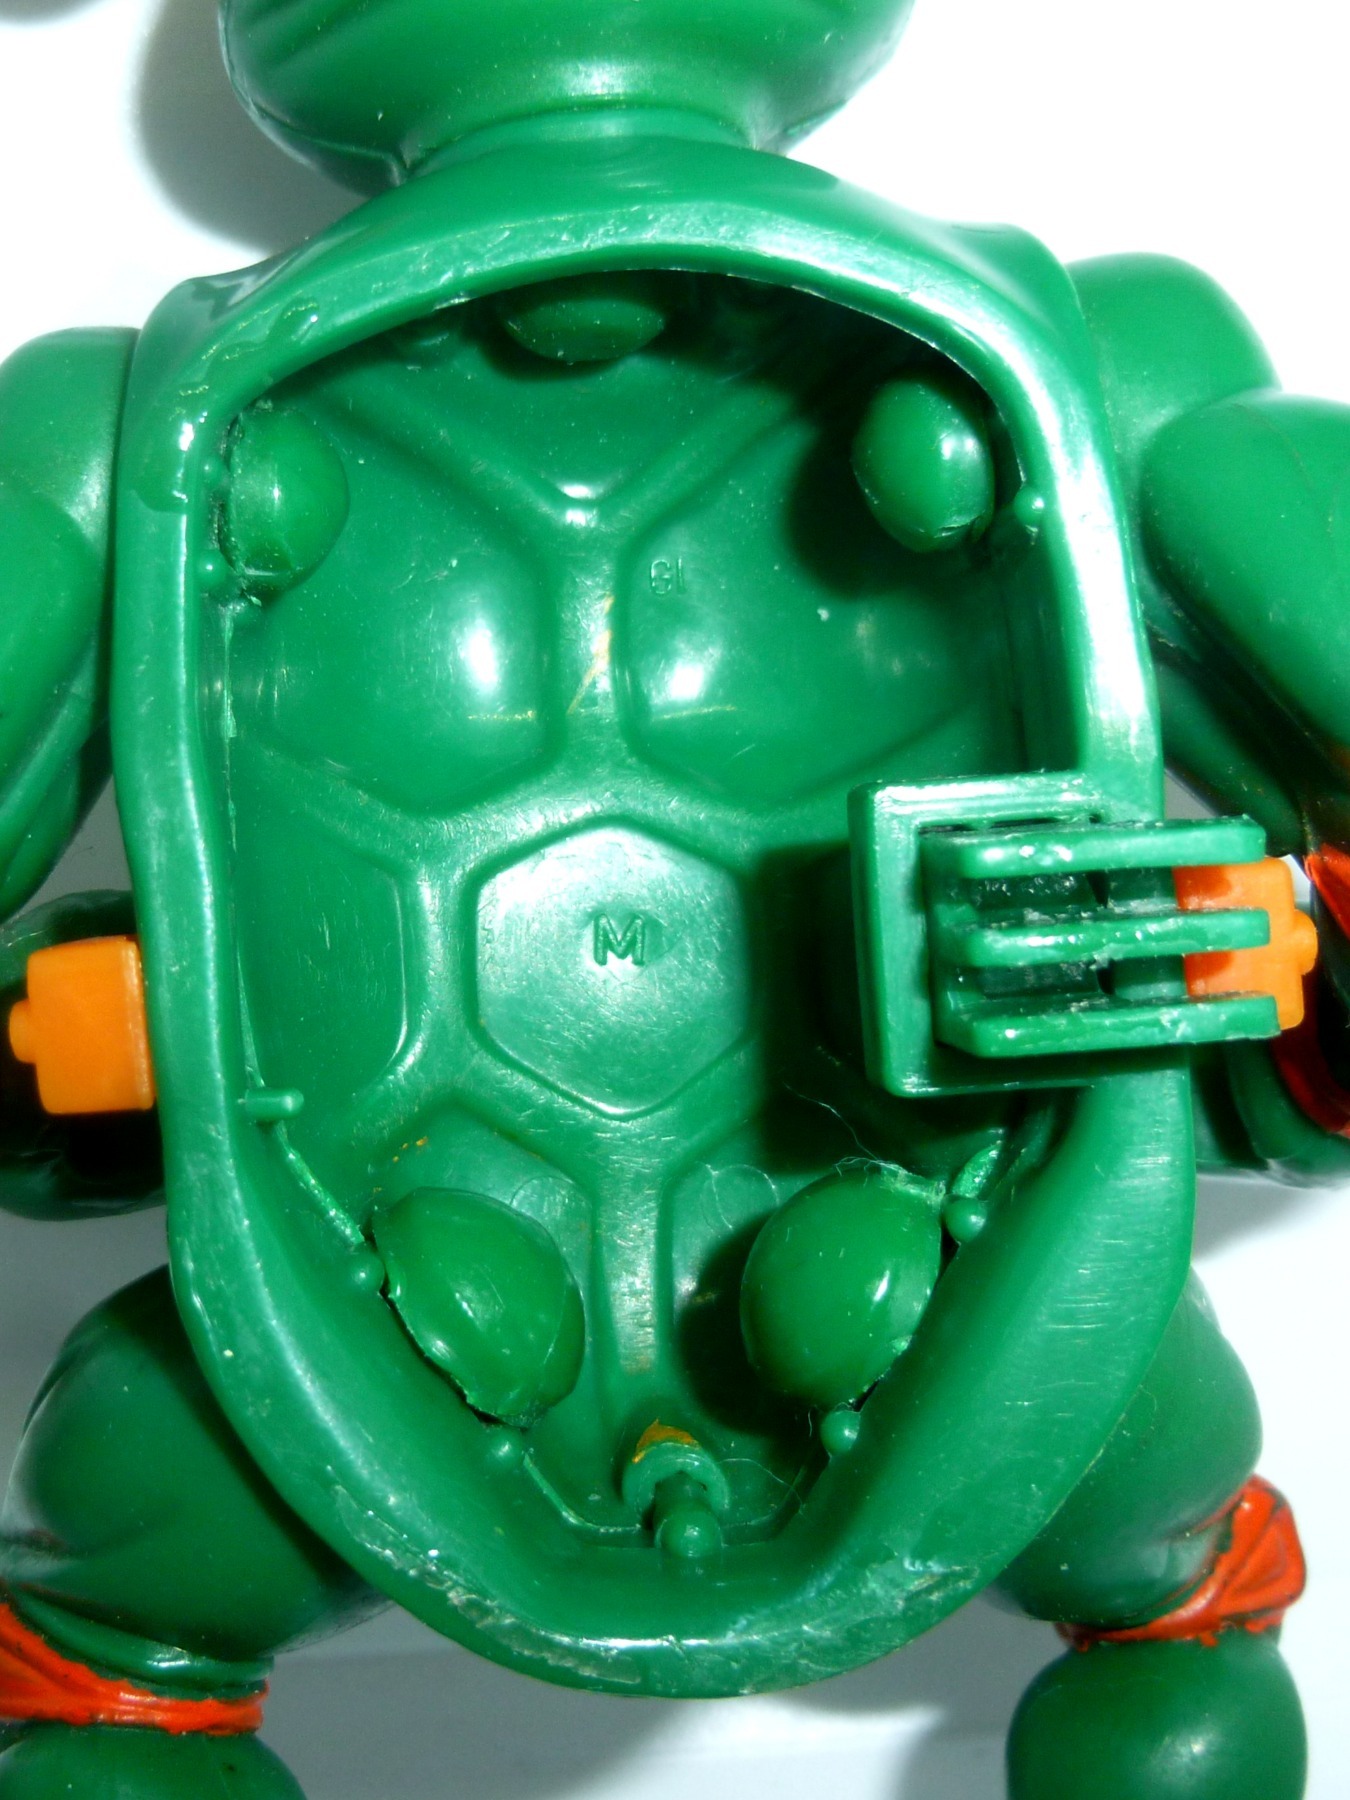 Michelangelo With Storage Shell 1990 Mirage Studios / Playmates Toys 4